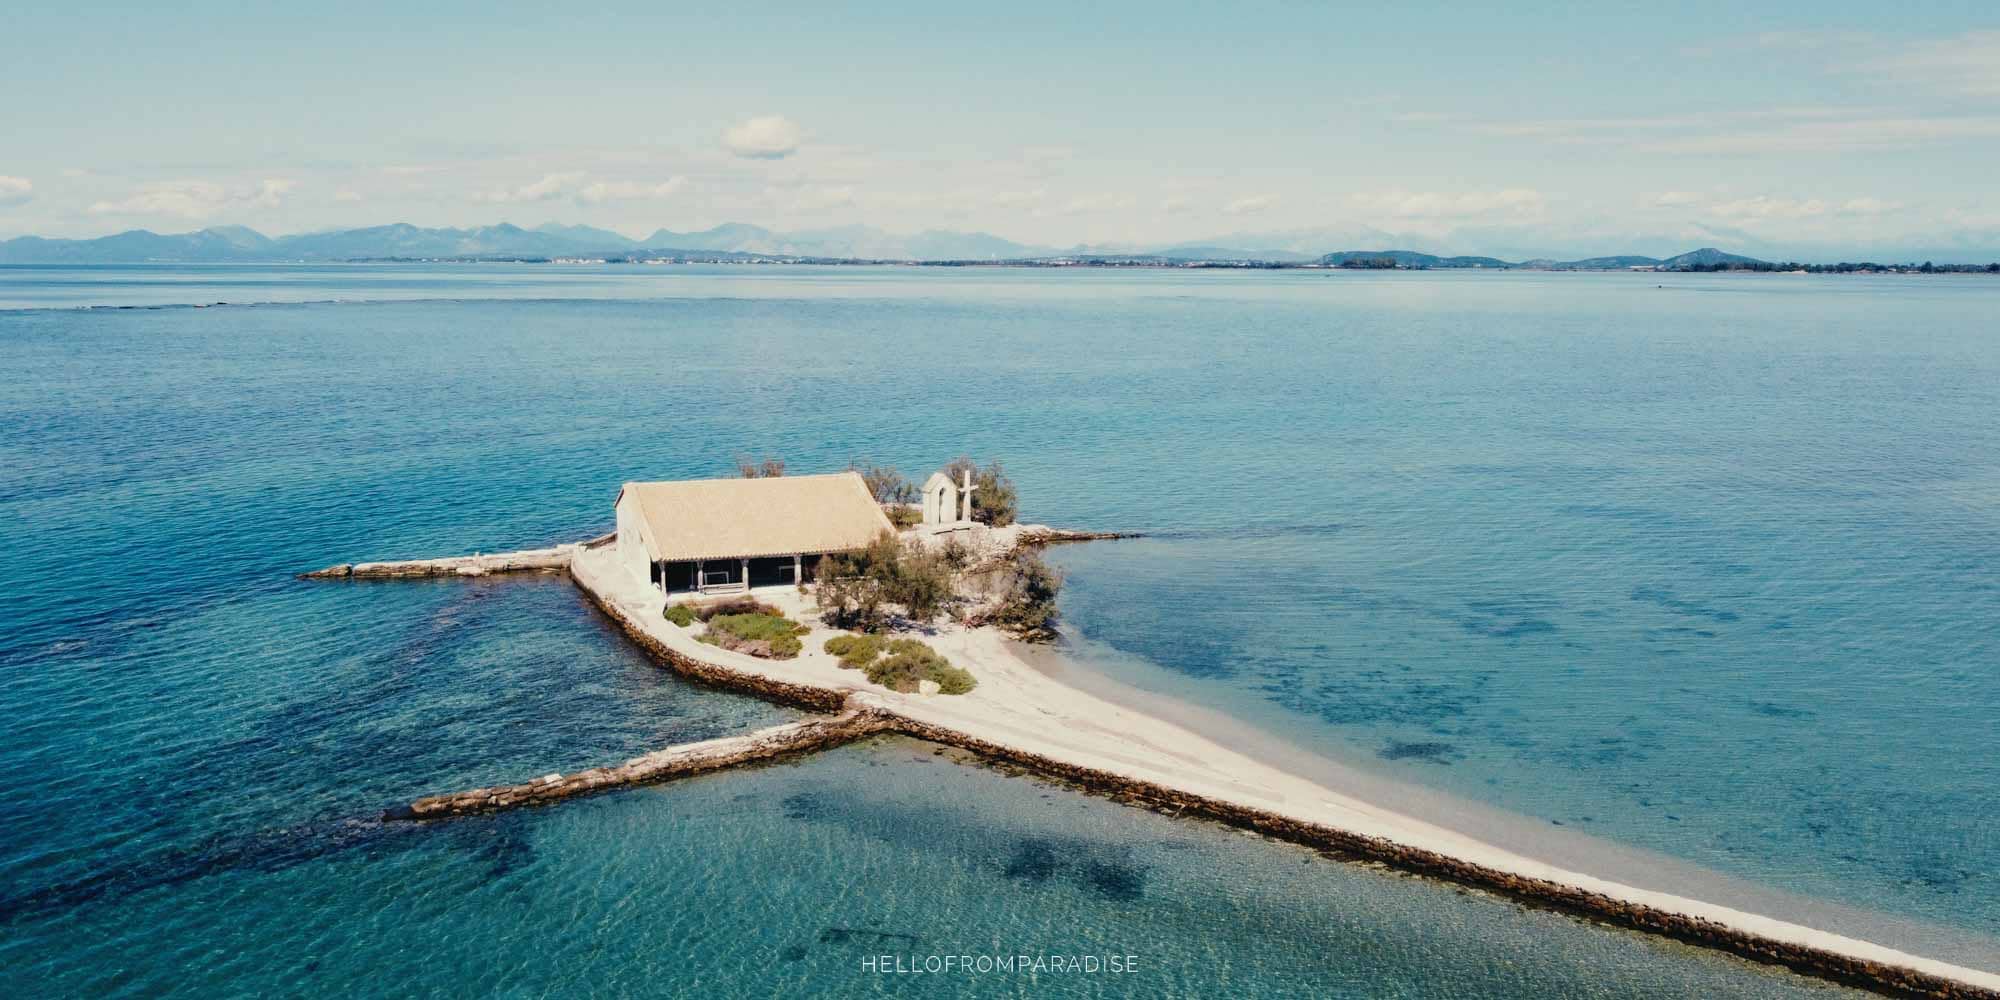 A church built on an islet surrounded by turquoise sea in Greece